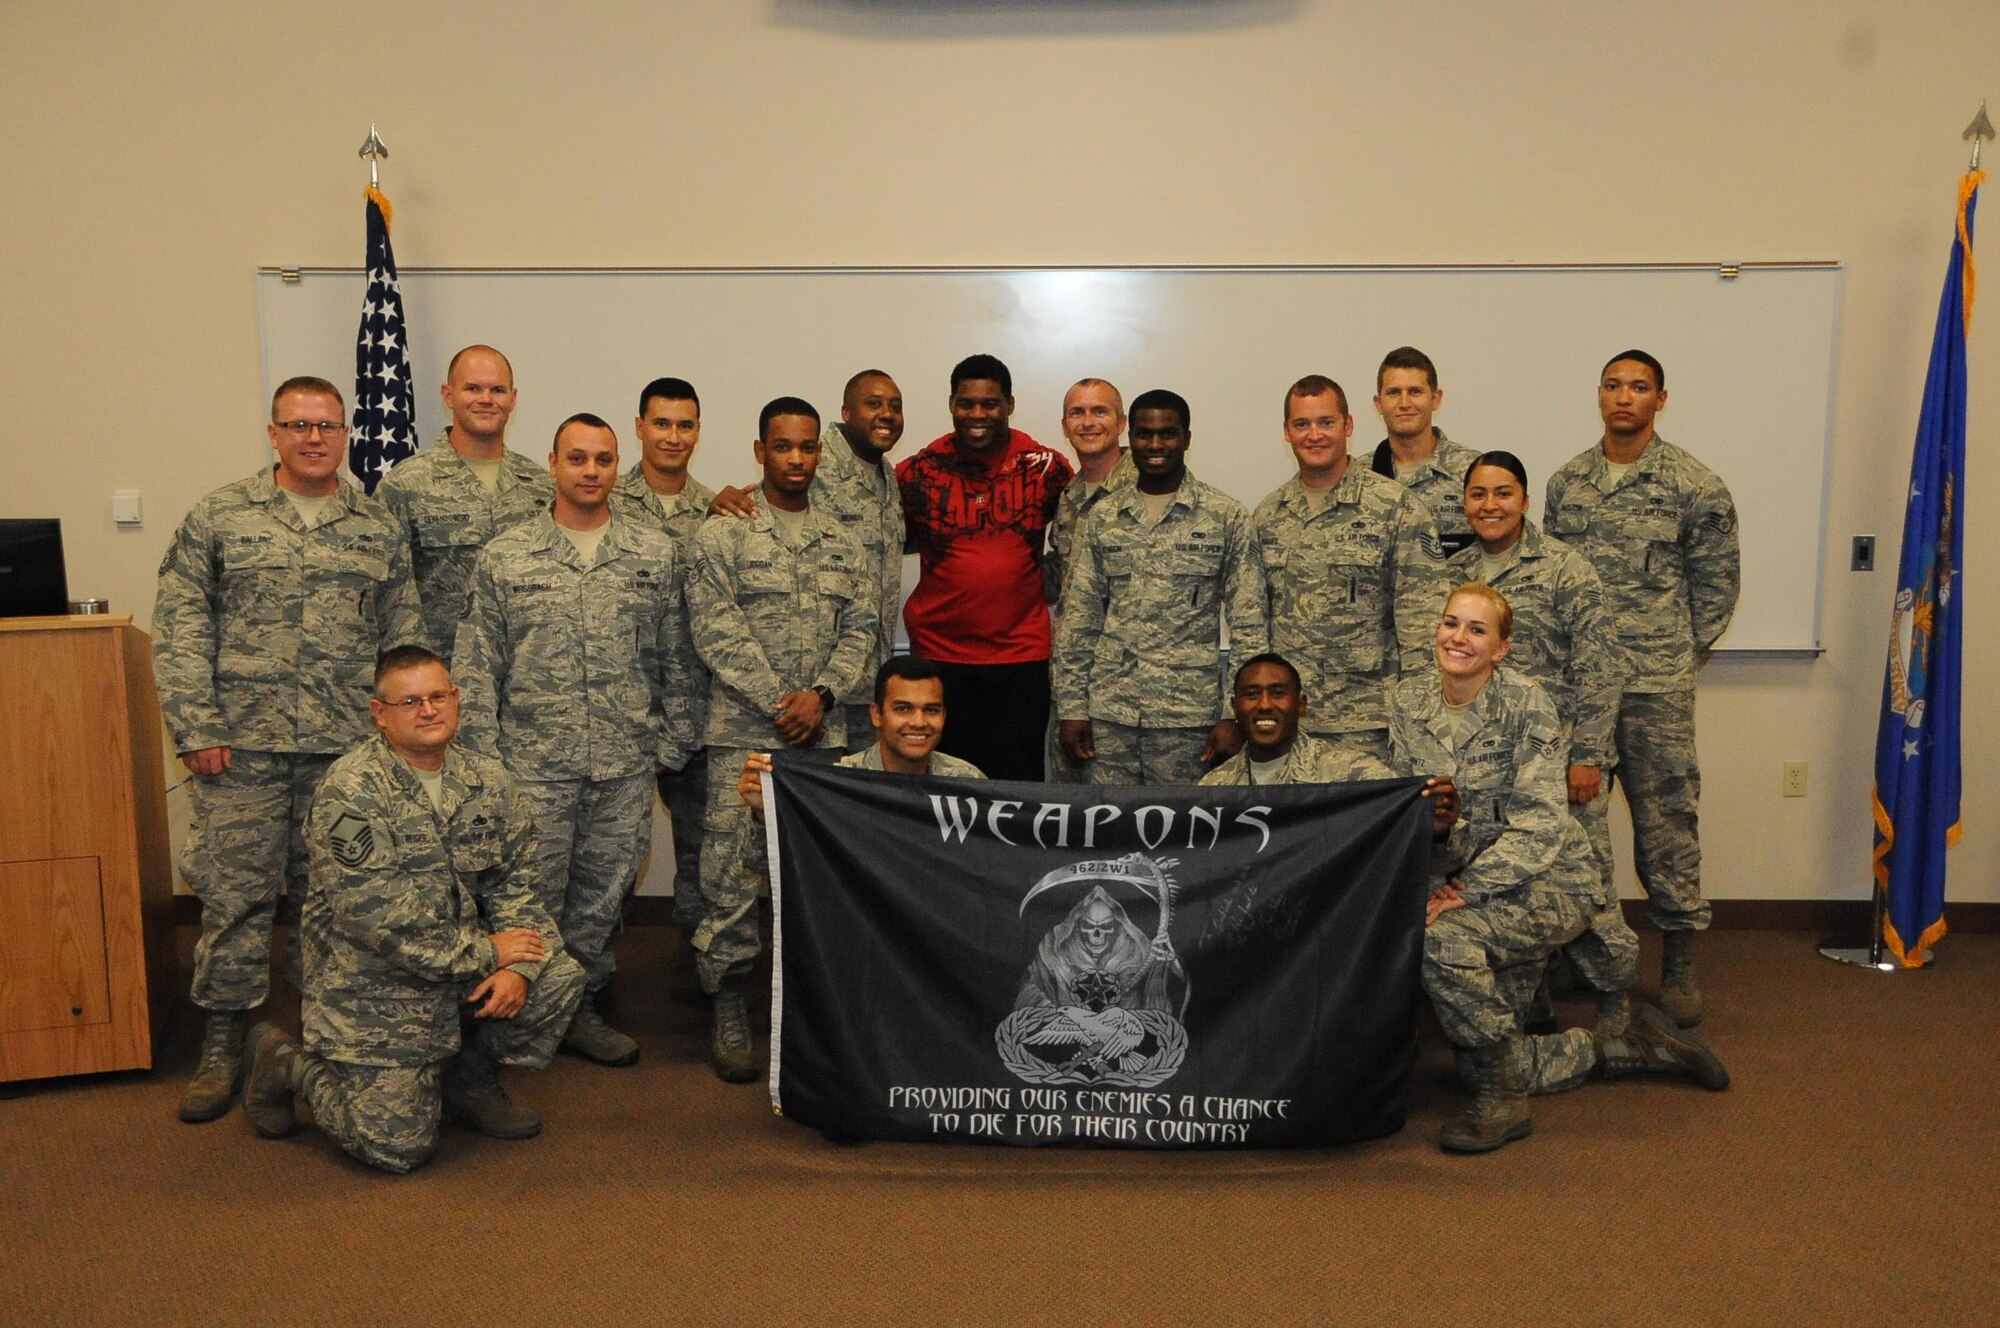 Herschel Walker, former NFL running back, poses for a photo with Airmen from the 2nd Operations Group at Barksdale Air Force Base, La., July 12, 2016. Walker visited Barksdale to tell Airmen his story about battling Dissociative Identity Disorder, a disease characterized by the presence of two or more distinct identities. (U.S. Air Force photo/Airman 1st Class Stuart Bright)